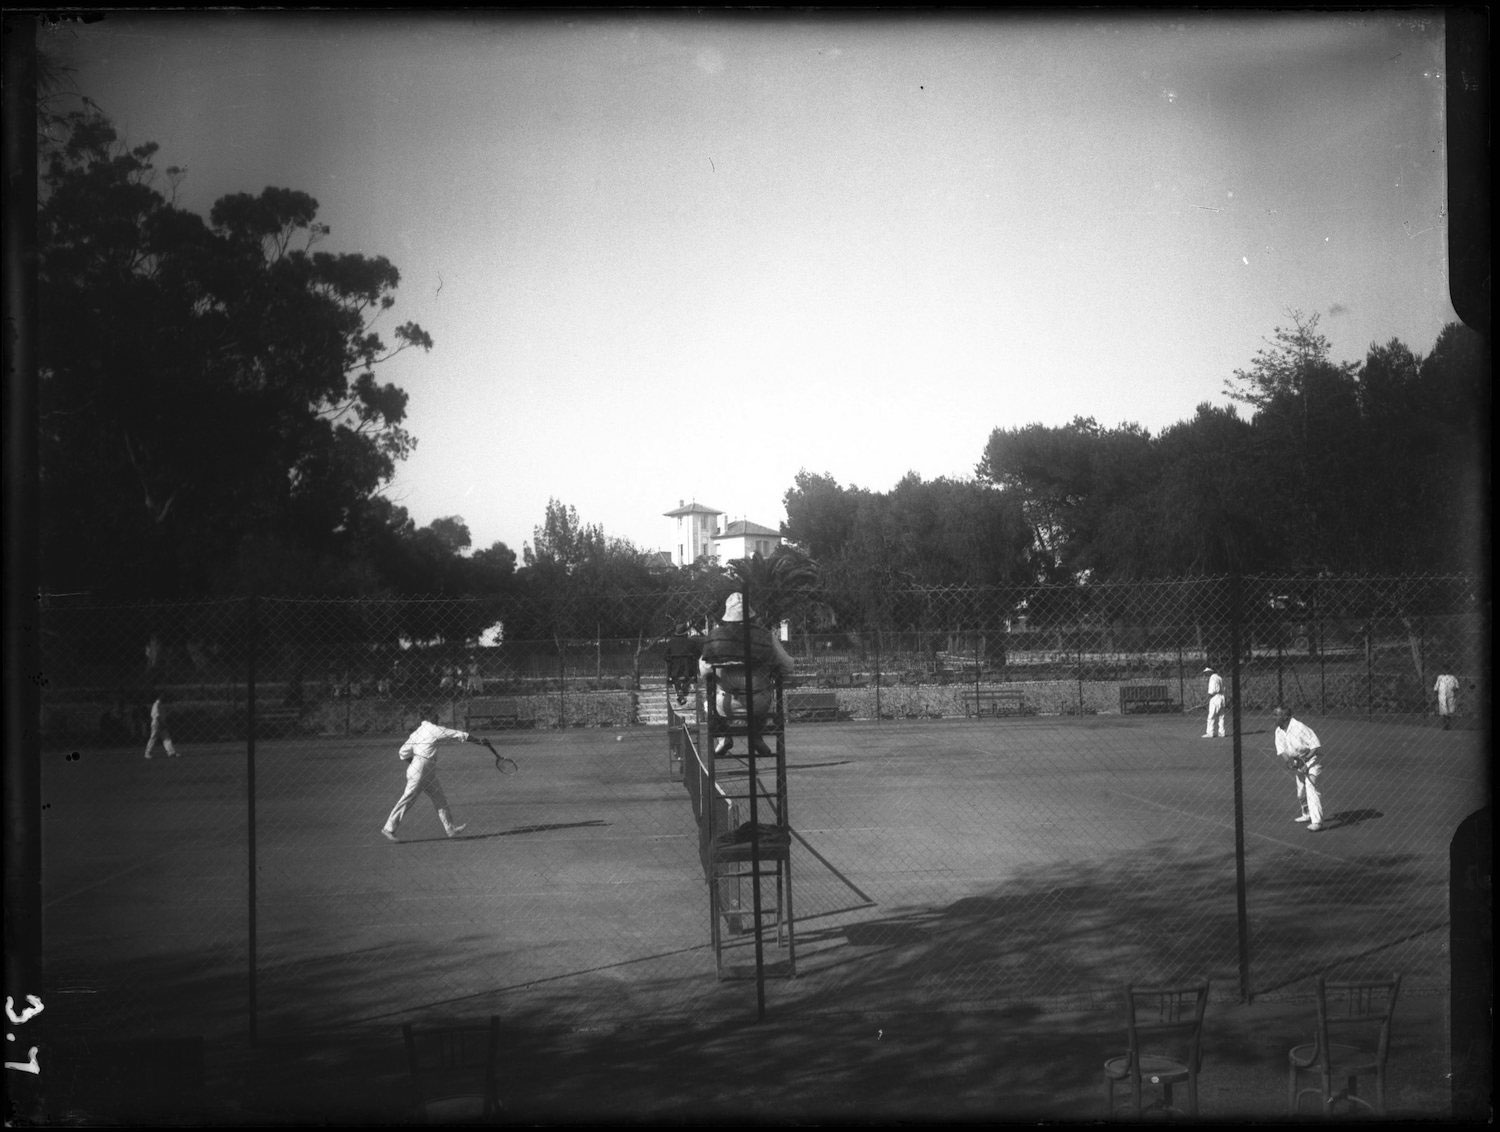 Action shot of a tennis match from outside of the fences of the court.